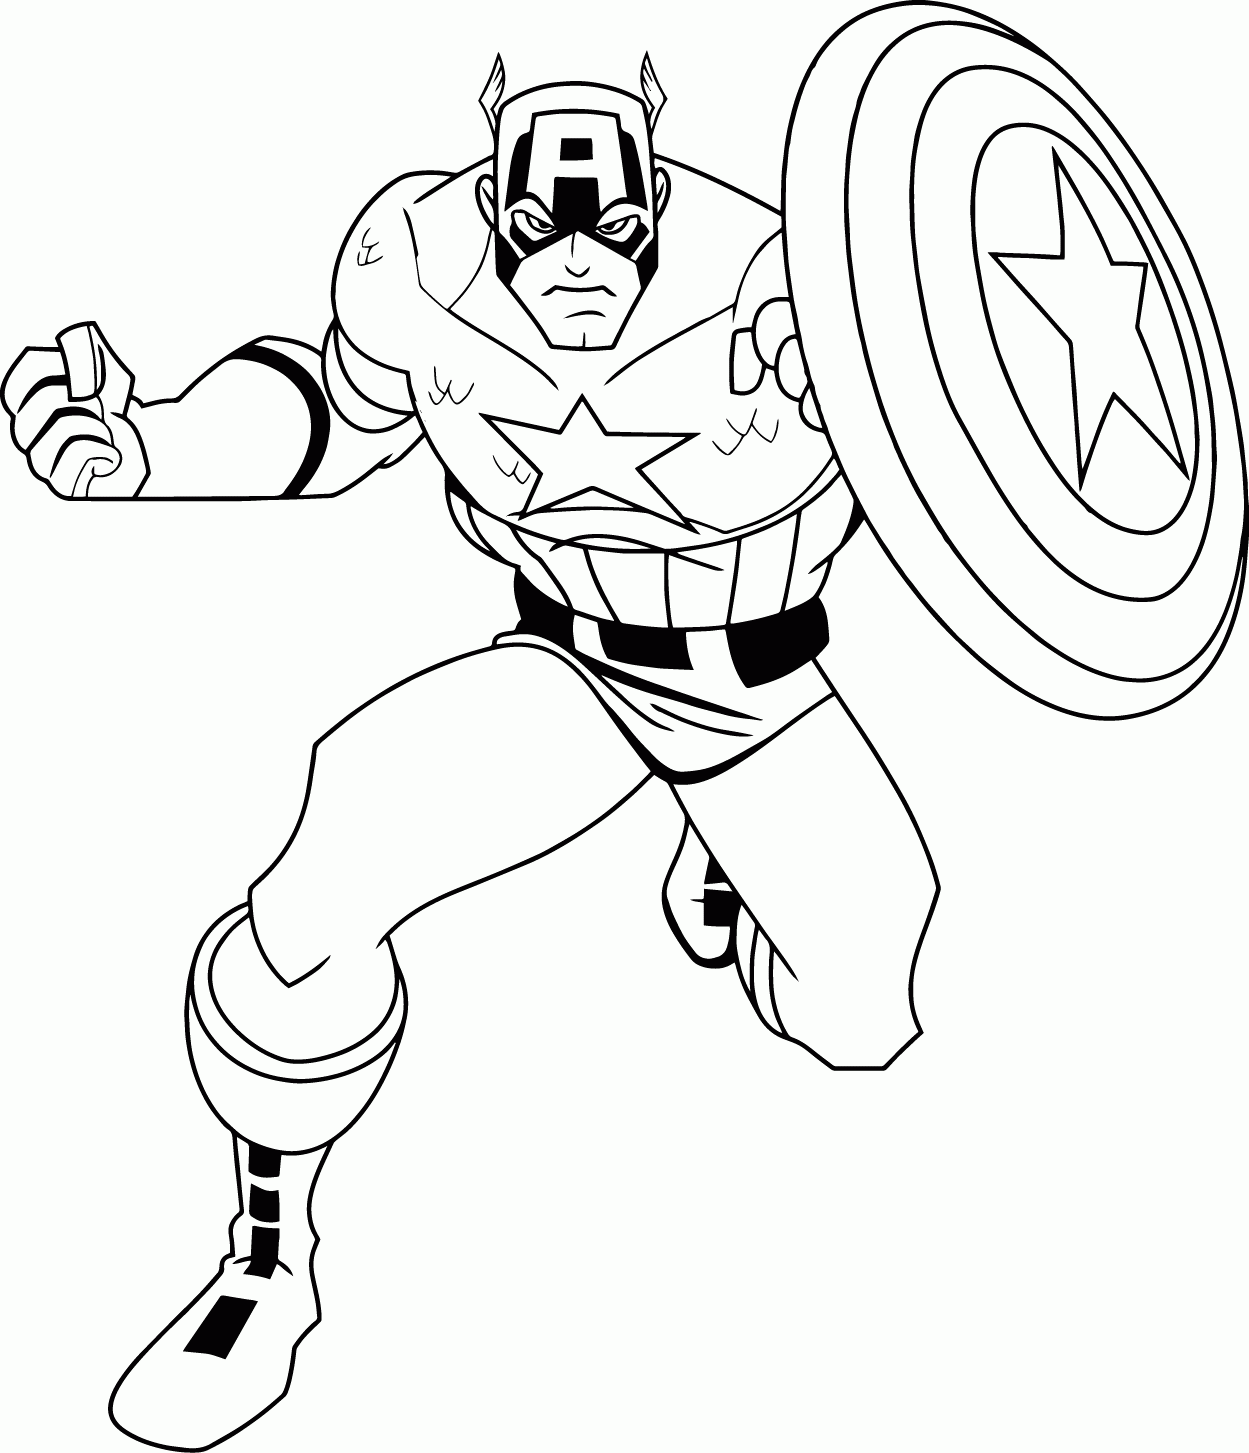 Download Captain America Coloring Pages | Wecoloringpage - Coloring Home